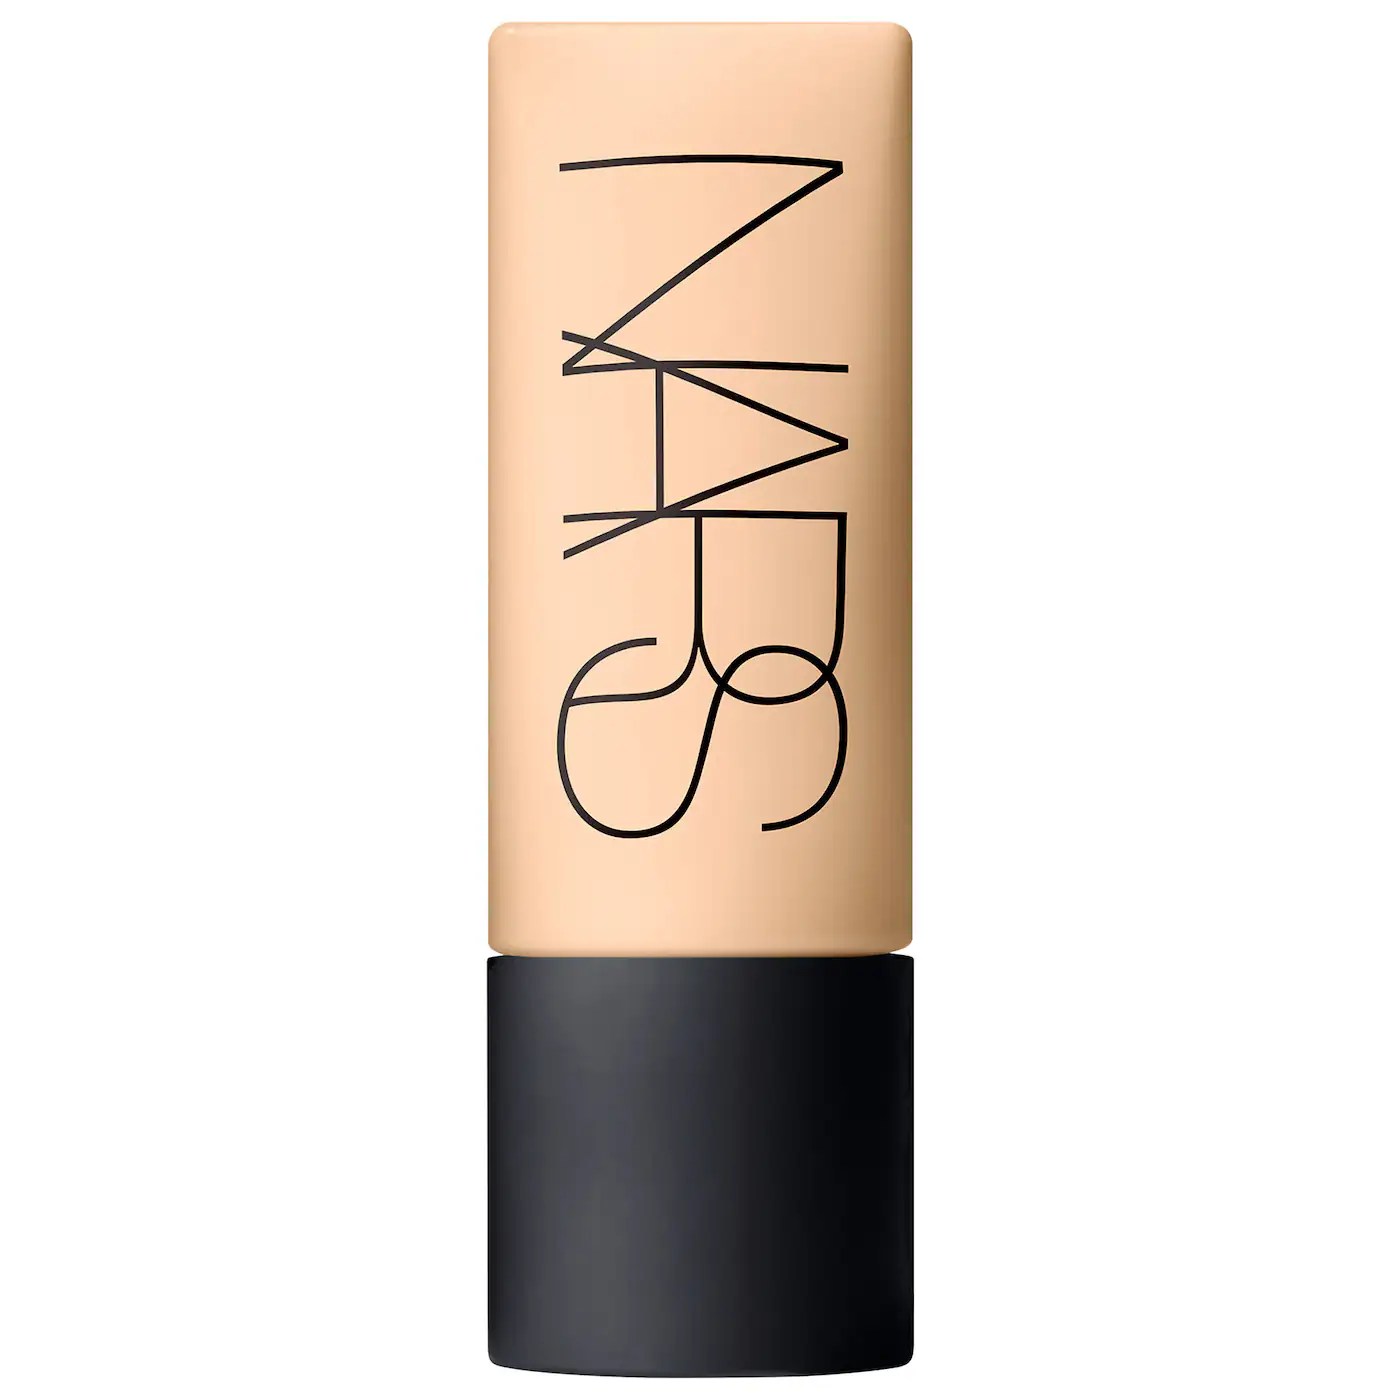 nars soft matte foundation, one of the best foundations for acne-prone skin